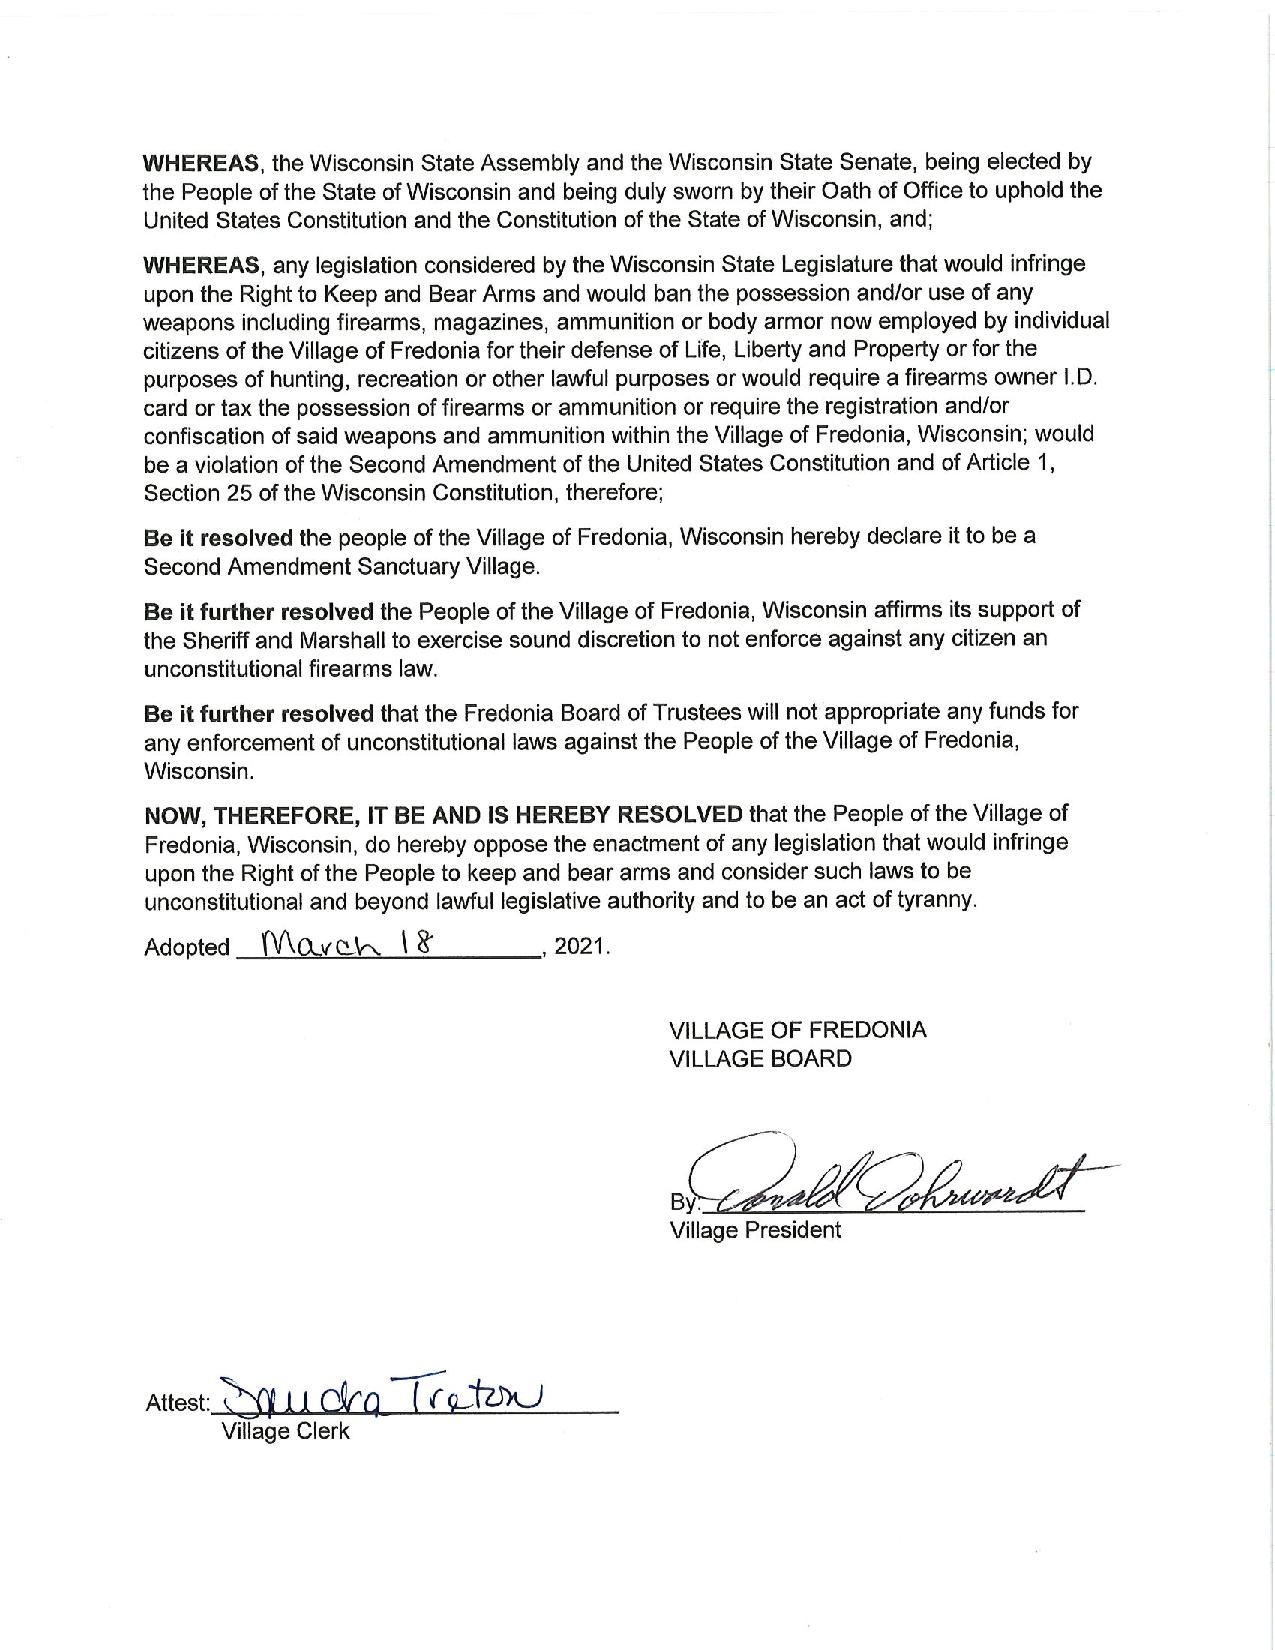 Village of Fredonia Resolution Page 2